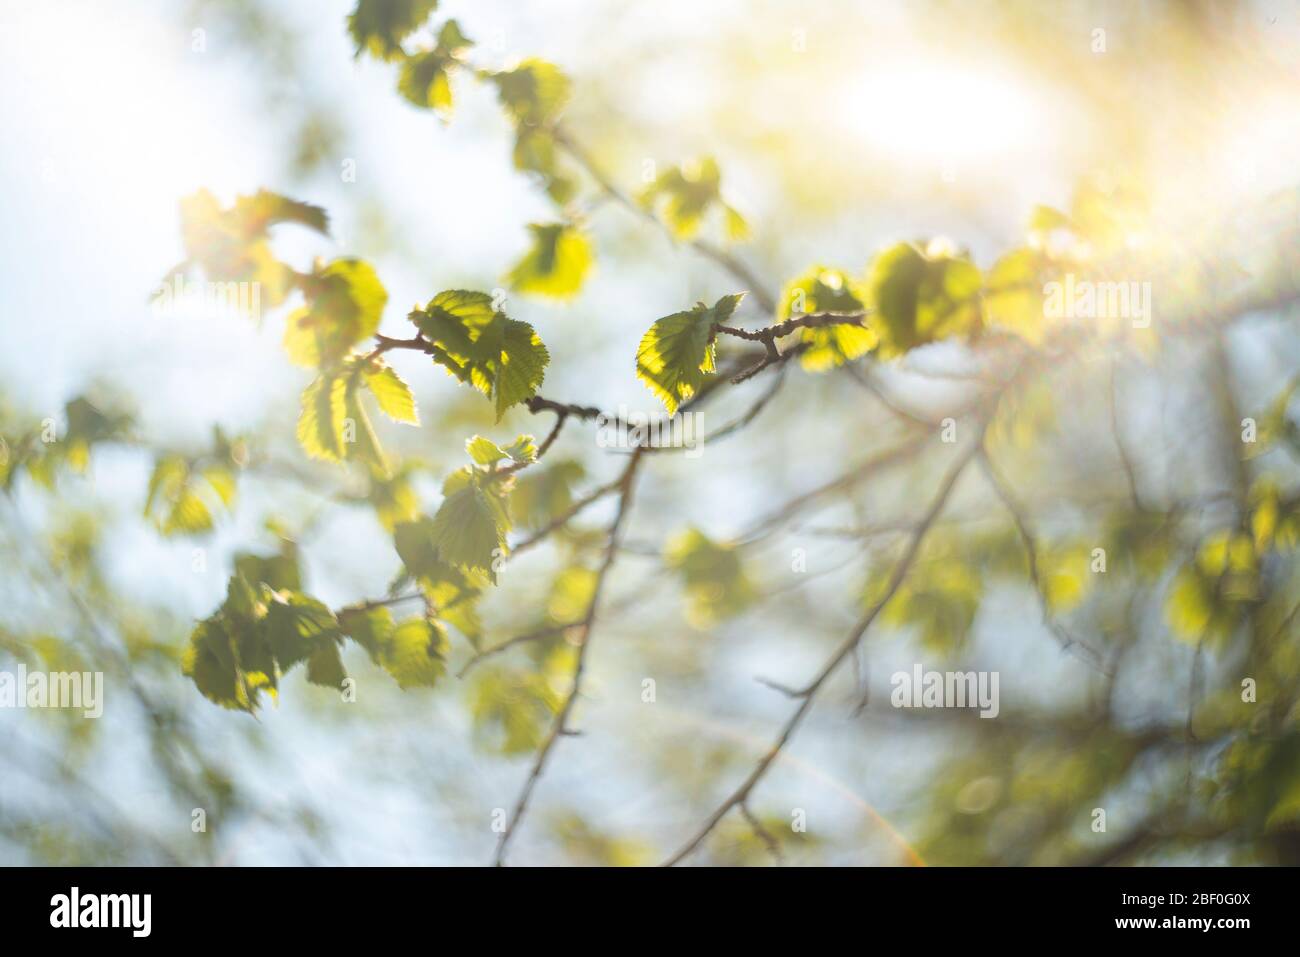 Hazelnut branches in the sun, close-up. Spring background. Stock Photo